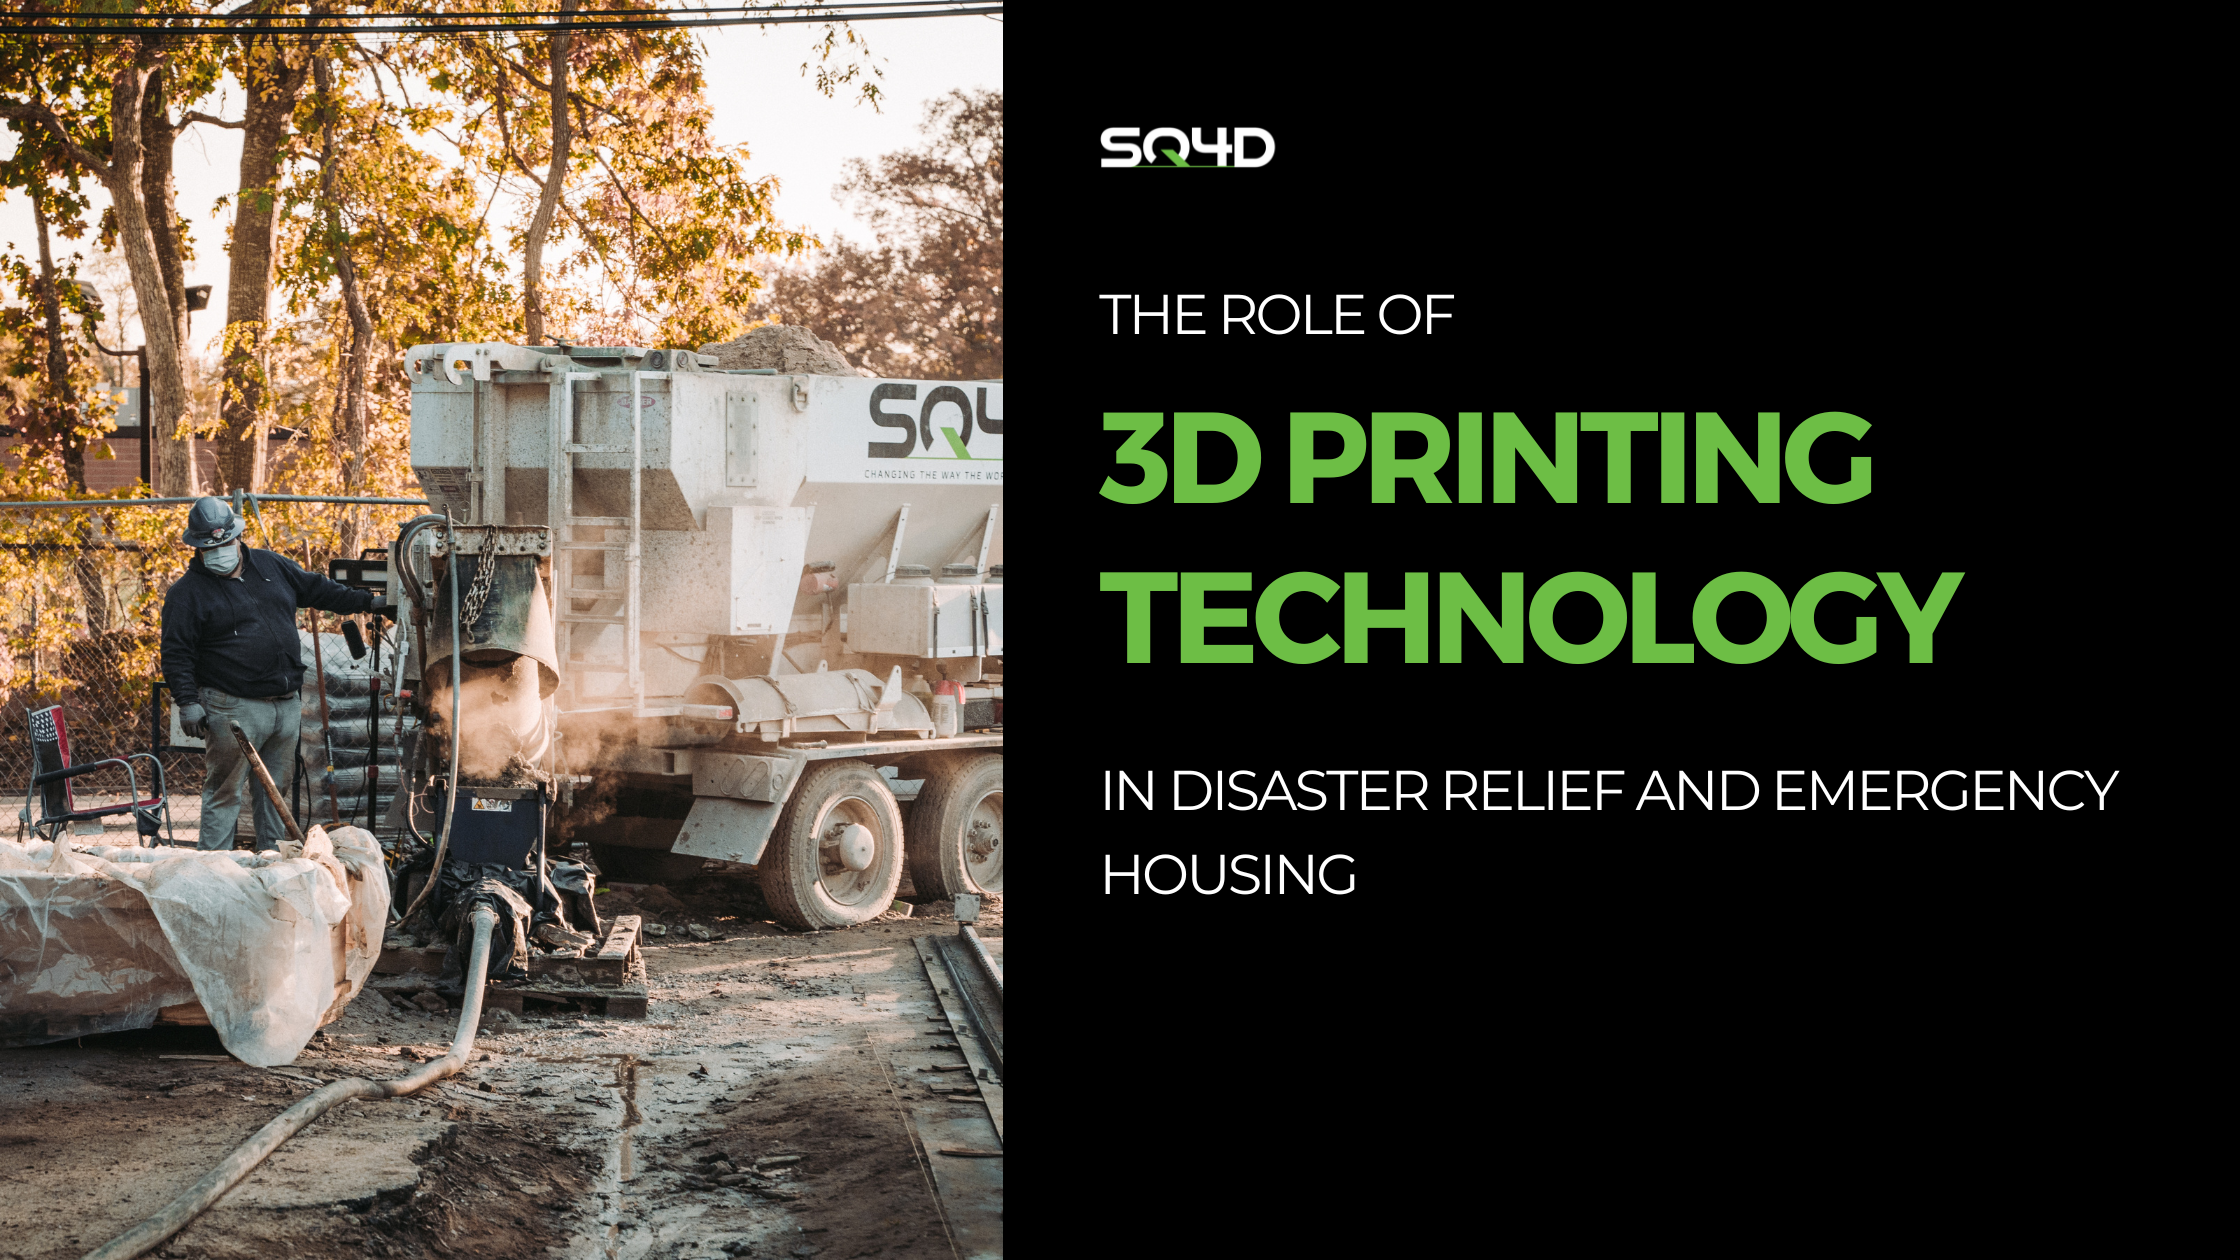 3D Printing Technology For Disaster Relief & Housing